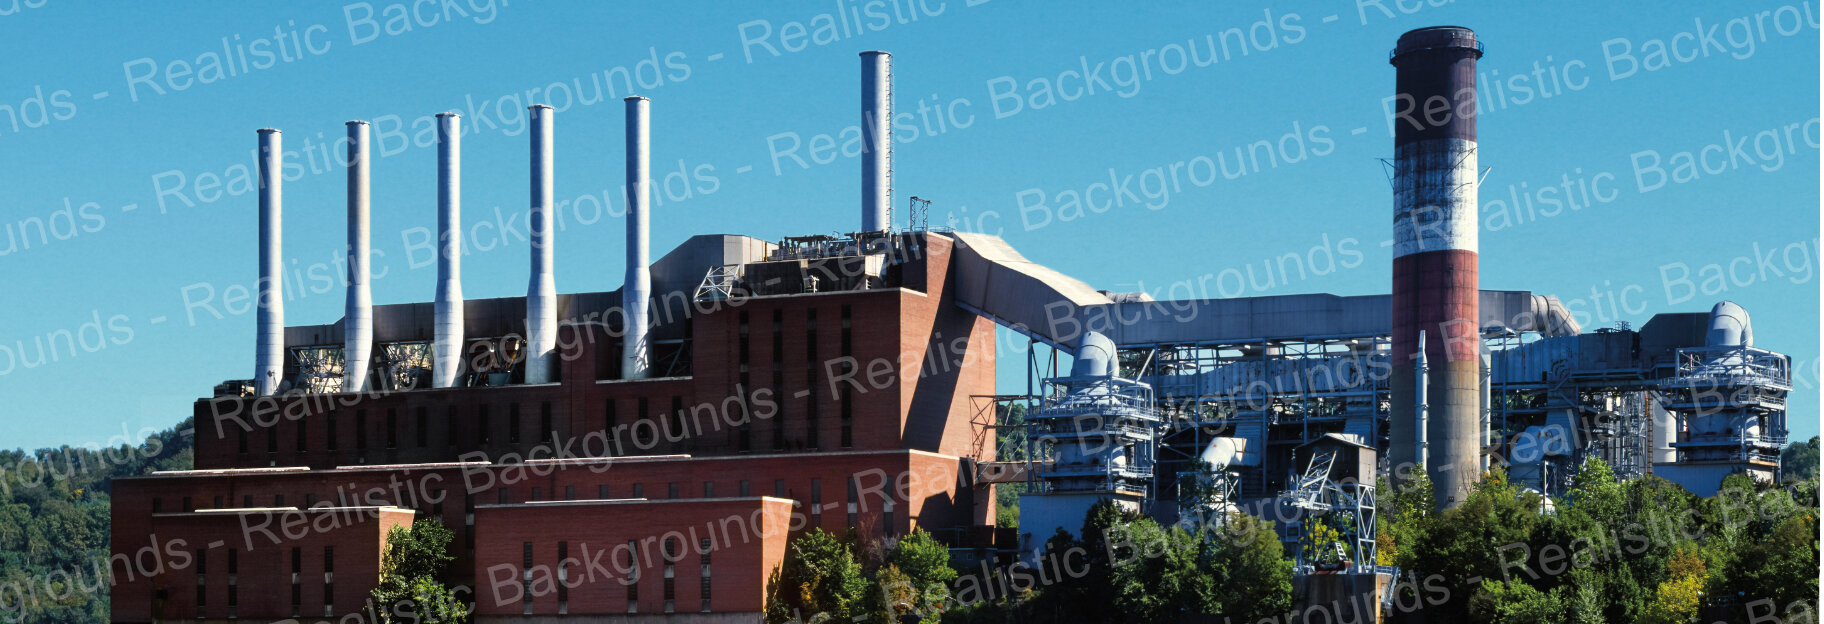 Realistic Backgrounds HO MOUNTAINS IN AUTUMN 14X38 Shipped Rolled Item 704-16 Left